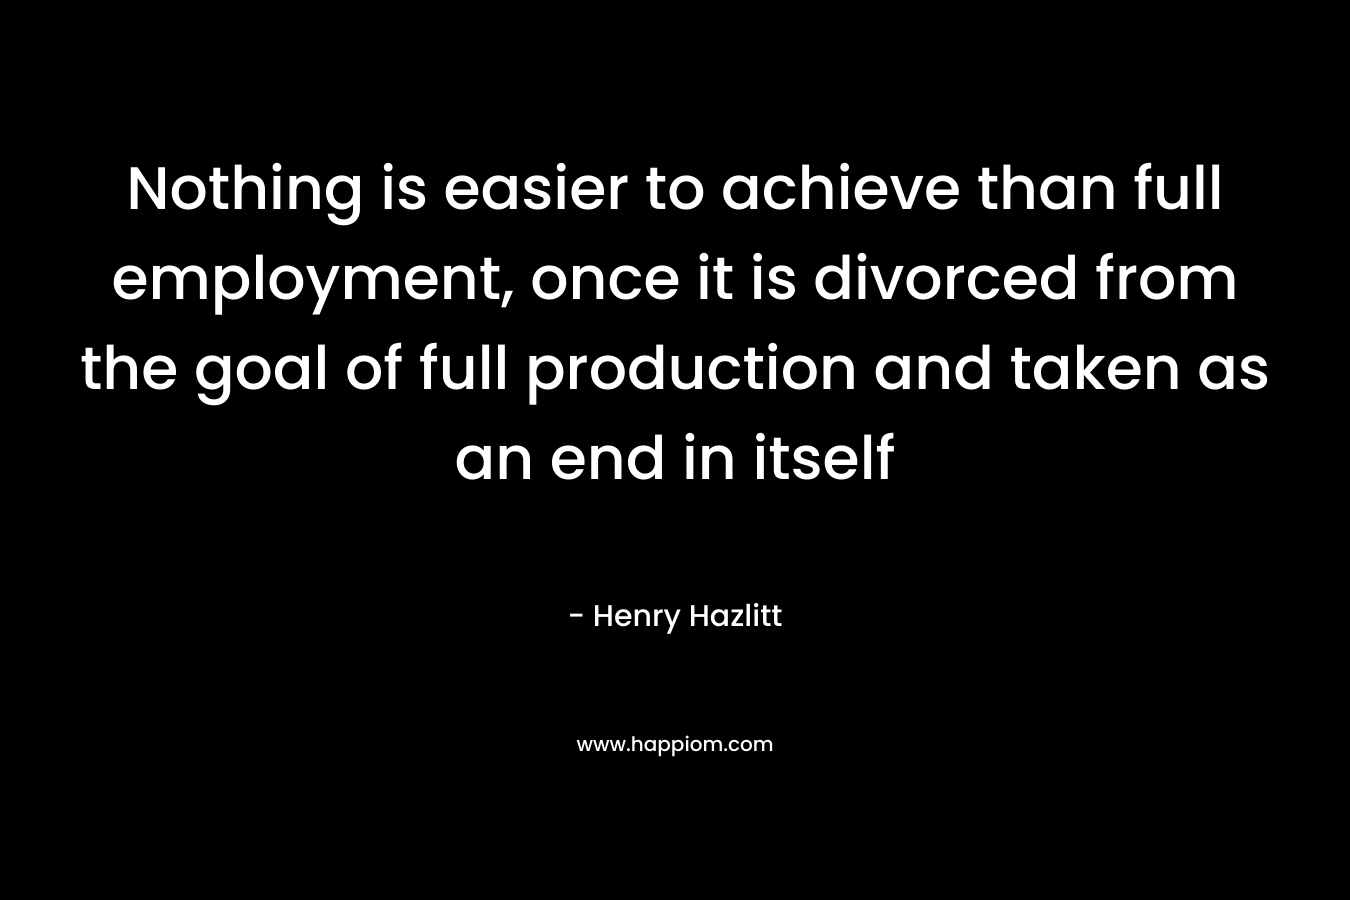 Nothing is easier to achieve than full employment, once it is divorced from the goal of full production and taken as an end in itself – Henry Hazlitt